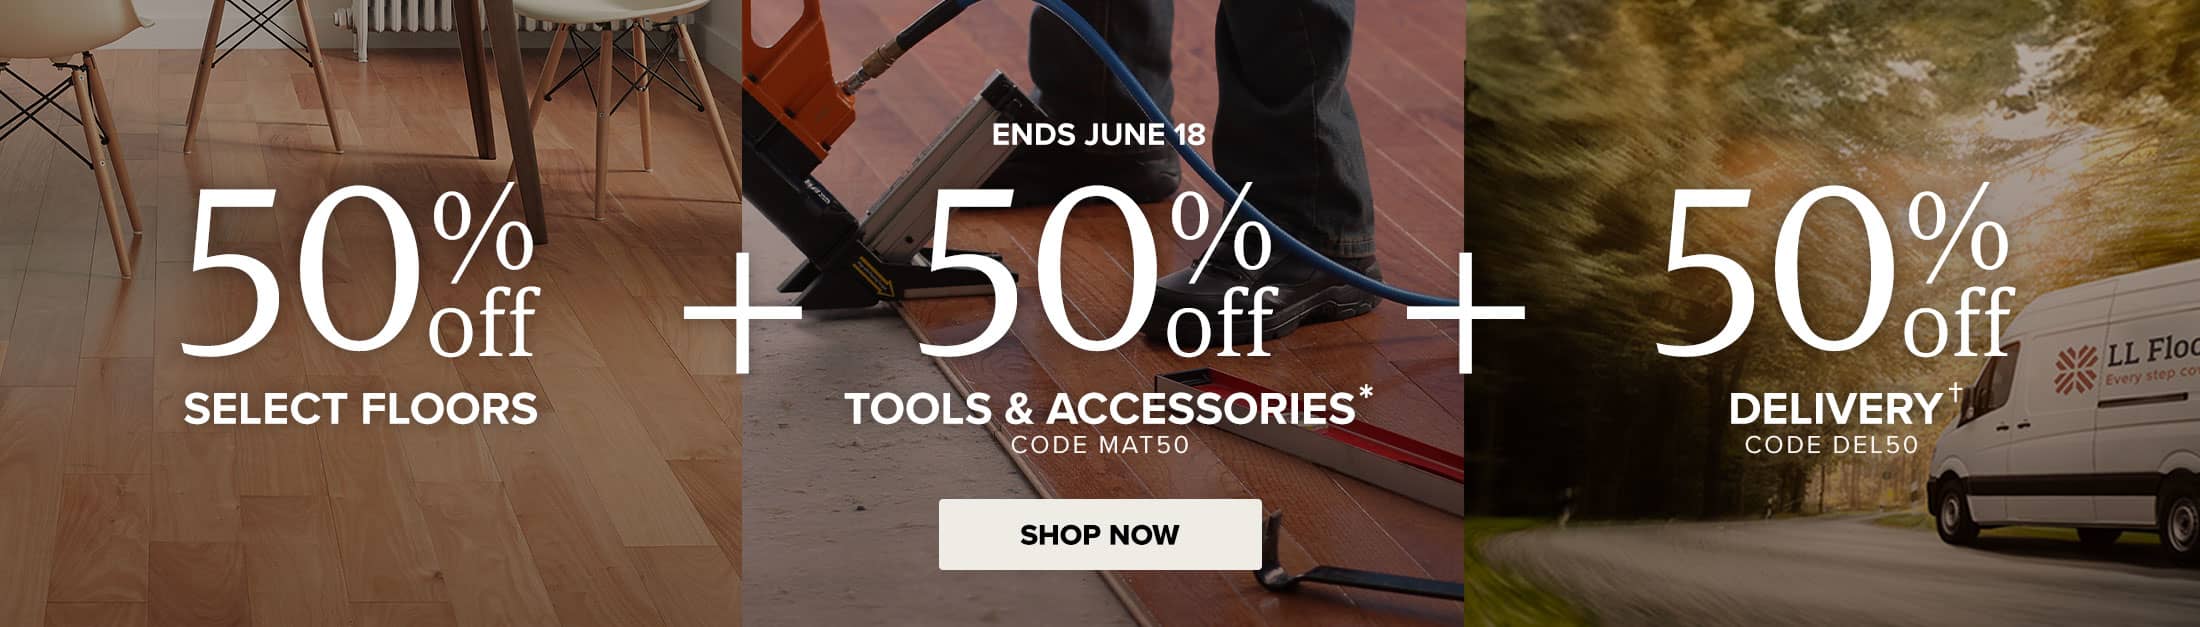 ends june 18 50 percent off select floors plus tools and accessories code mat50 plus delivery code del50